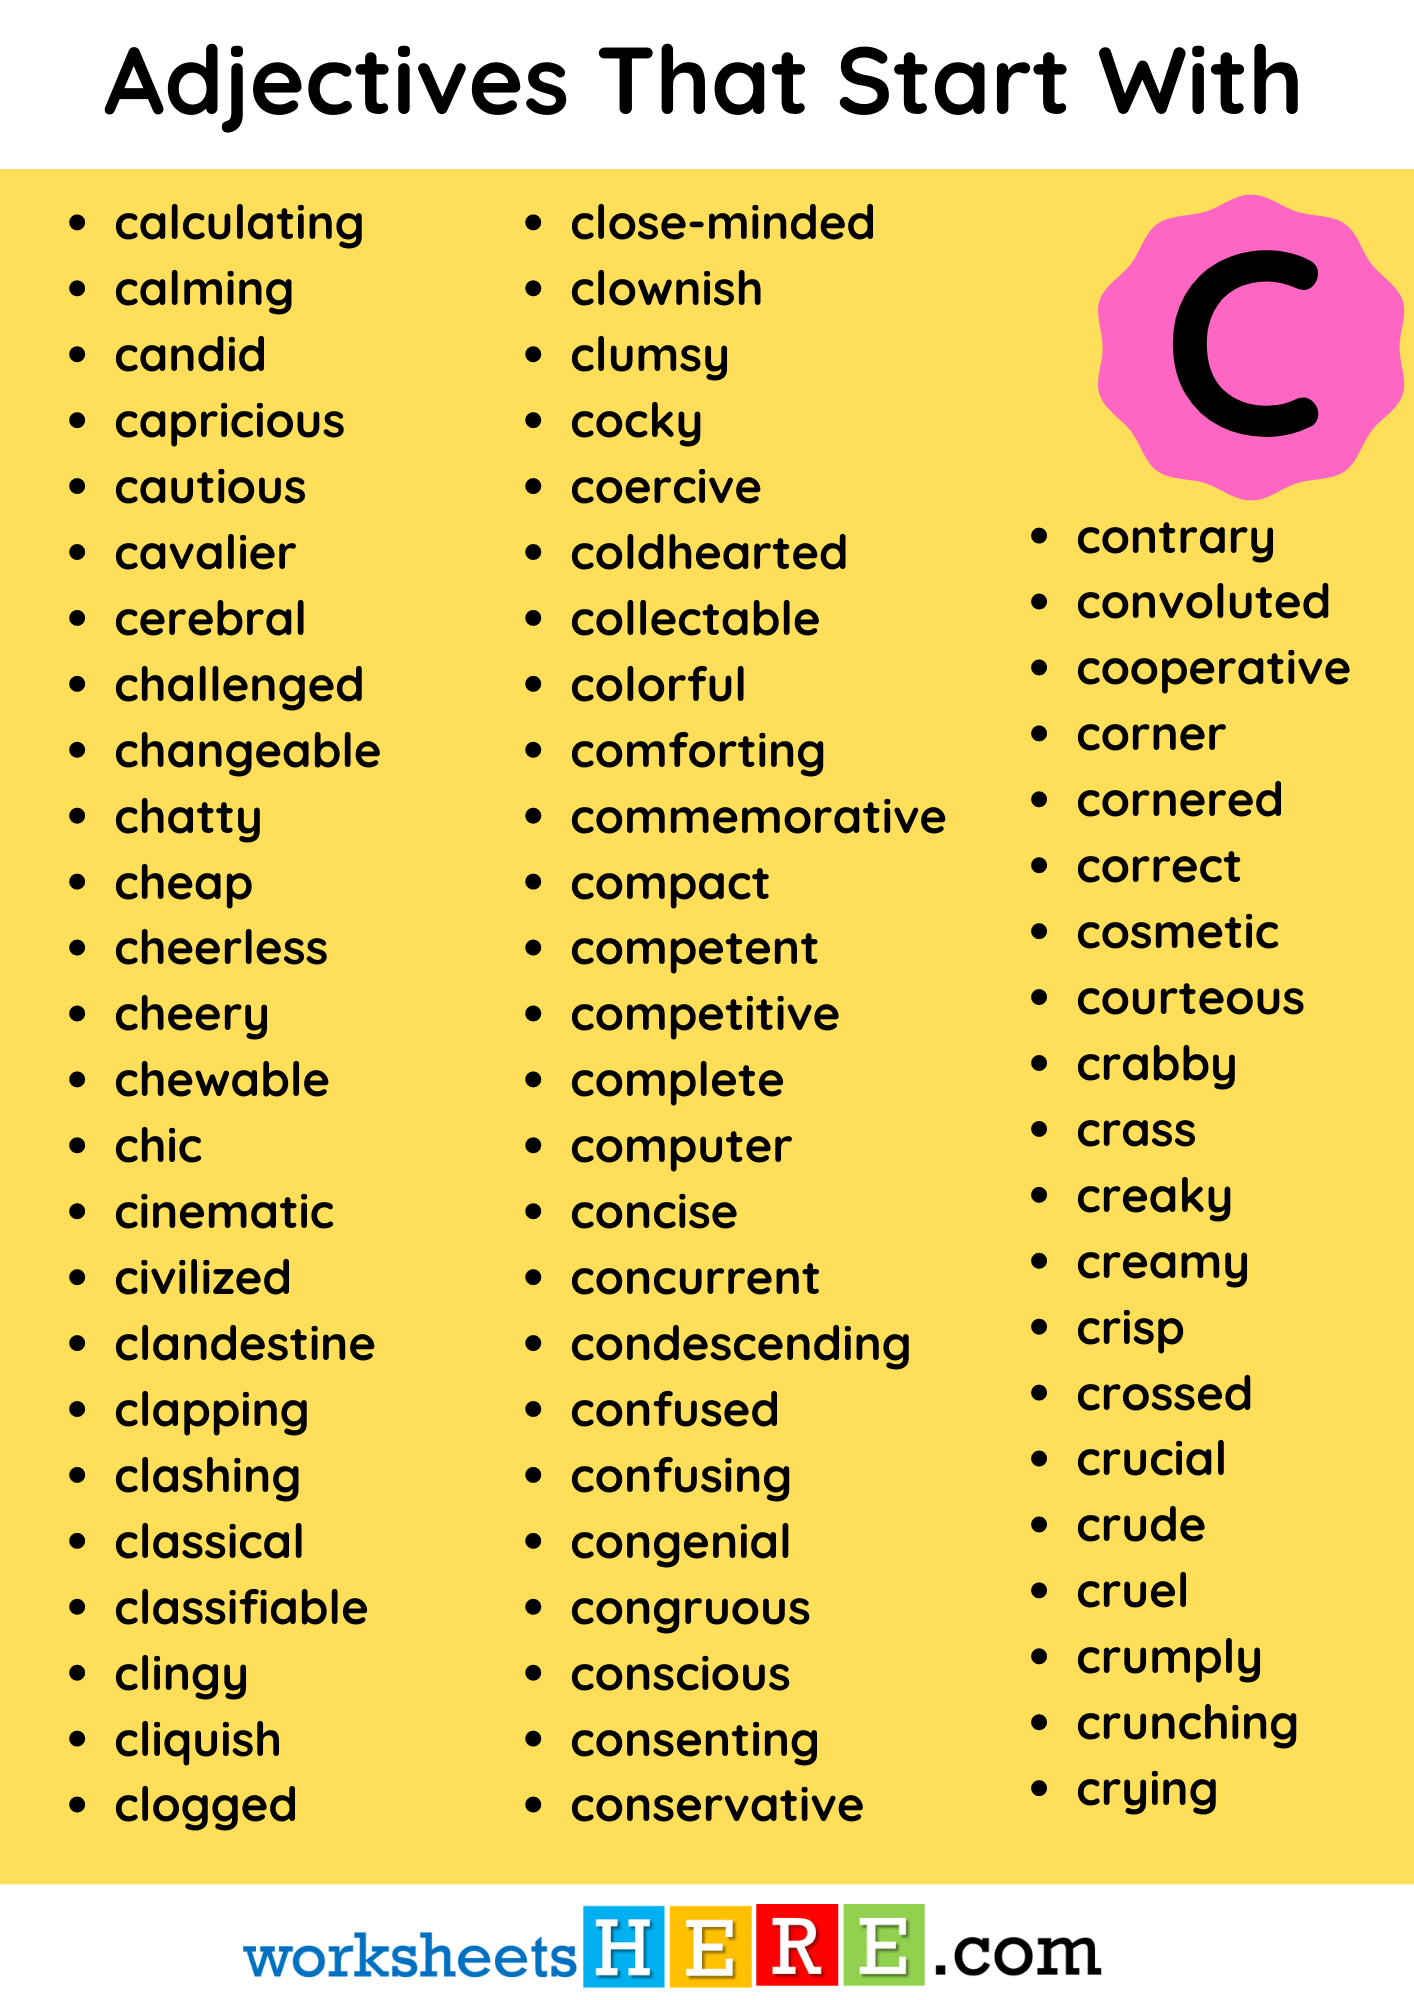 Adjectives That Start With C Vocabulary List PDF Worksheet For Students